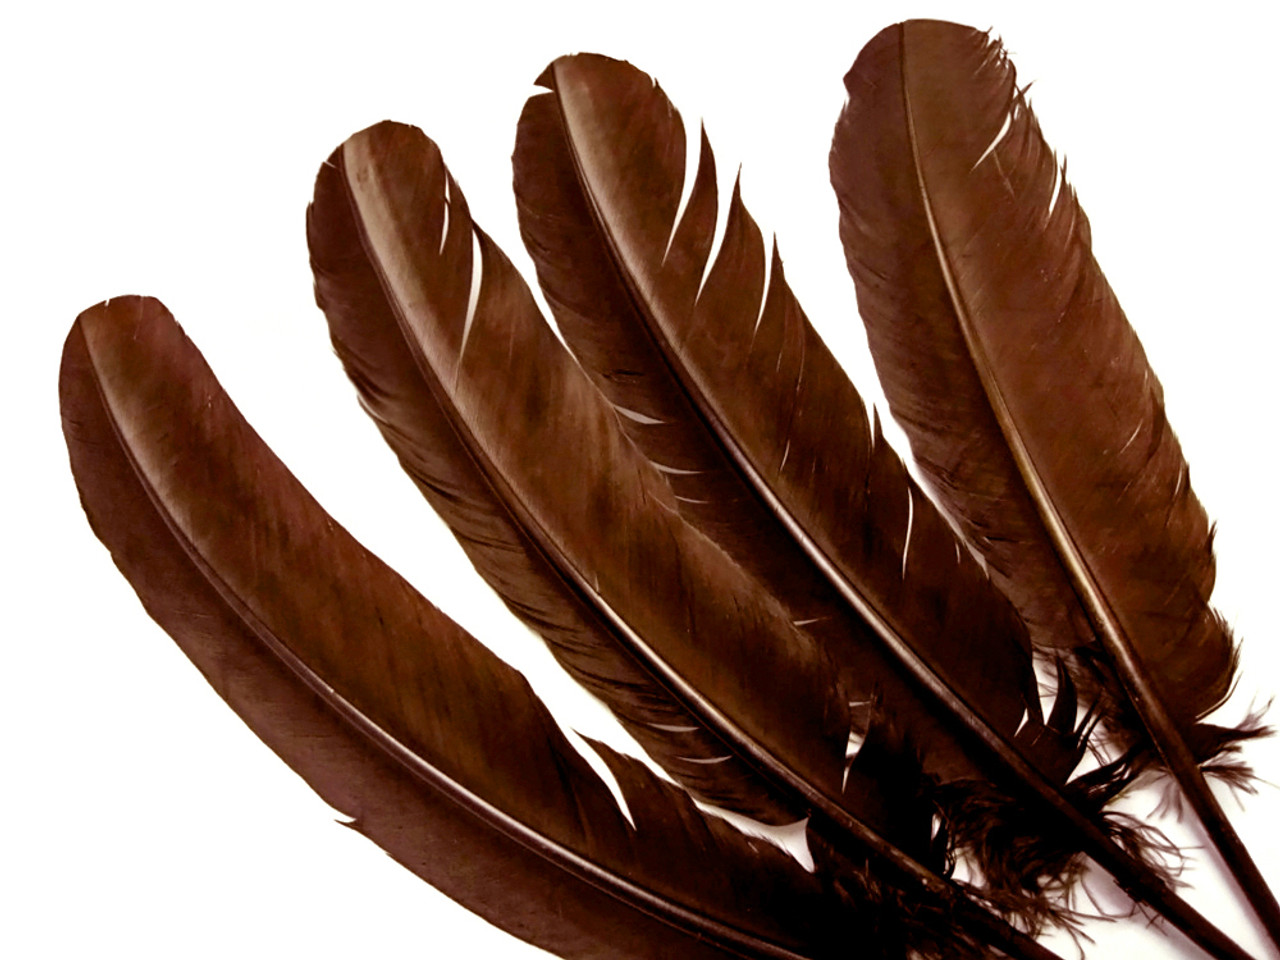 1 lb. - Brown Turkey Tom Rounds Secondary Wing Quill Wholesale Feathers (Bulk)